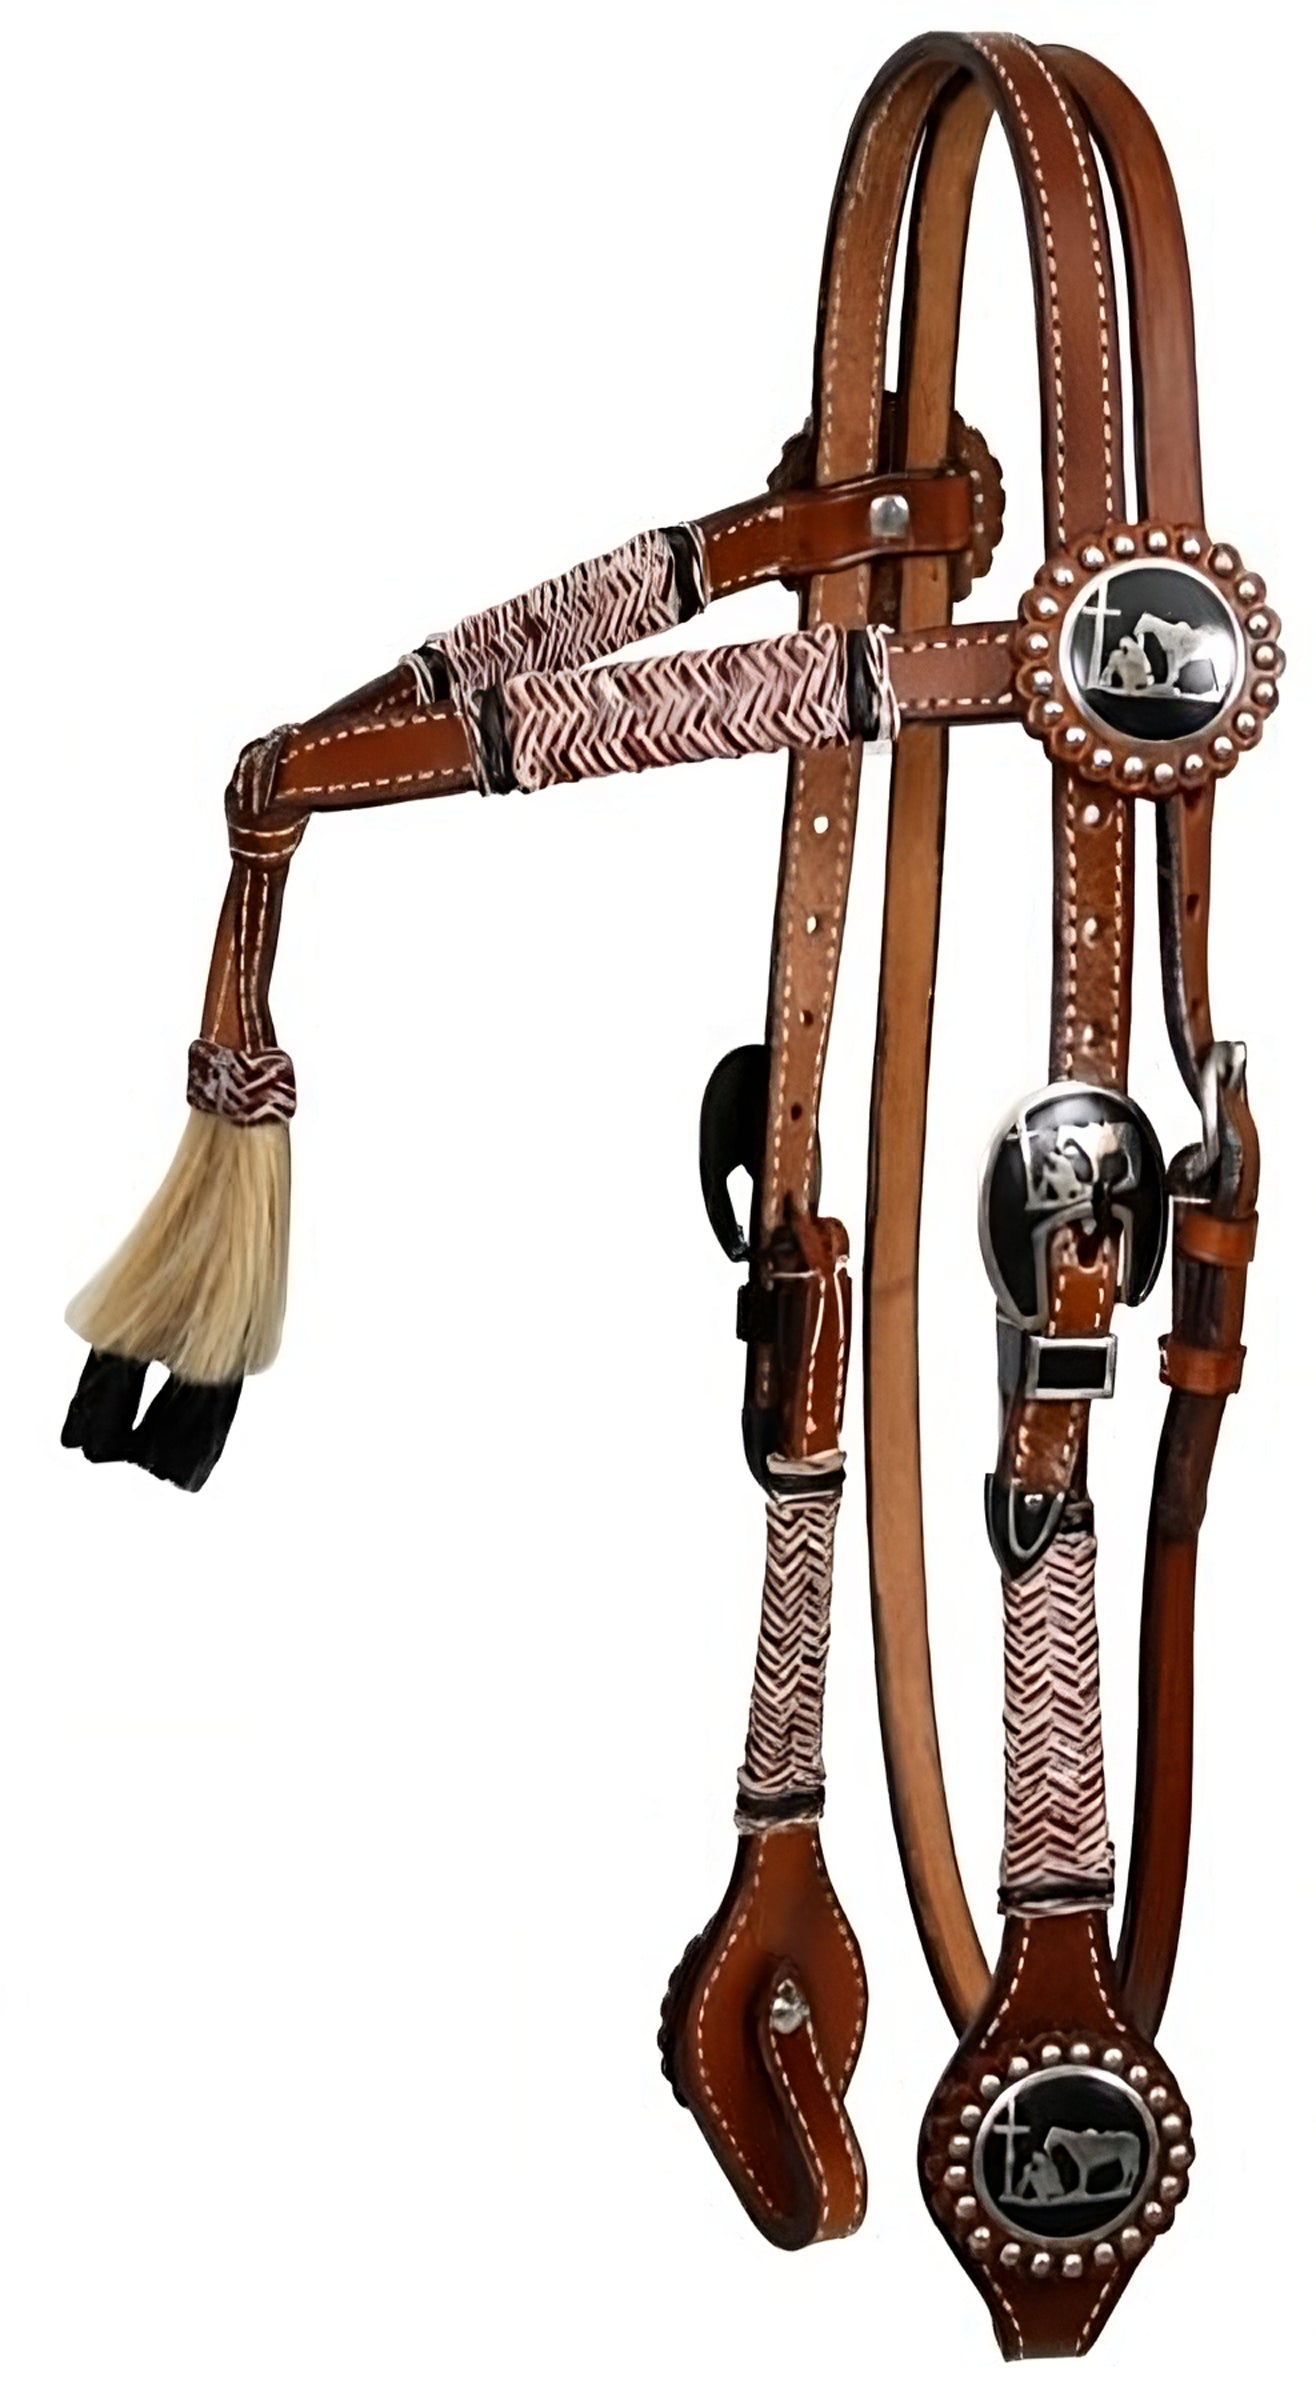 12645: Showman ® double stitched leather furturity knot rawhide braided headstall with horse hair Headstall Showman